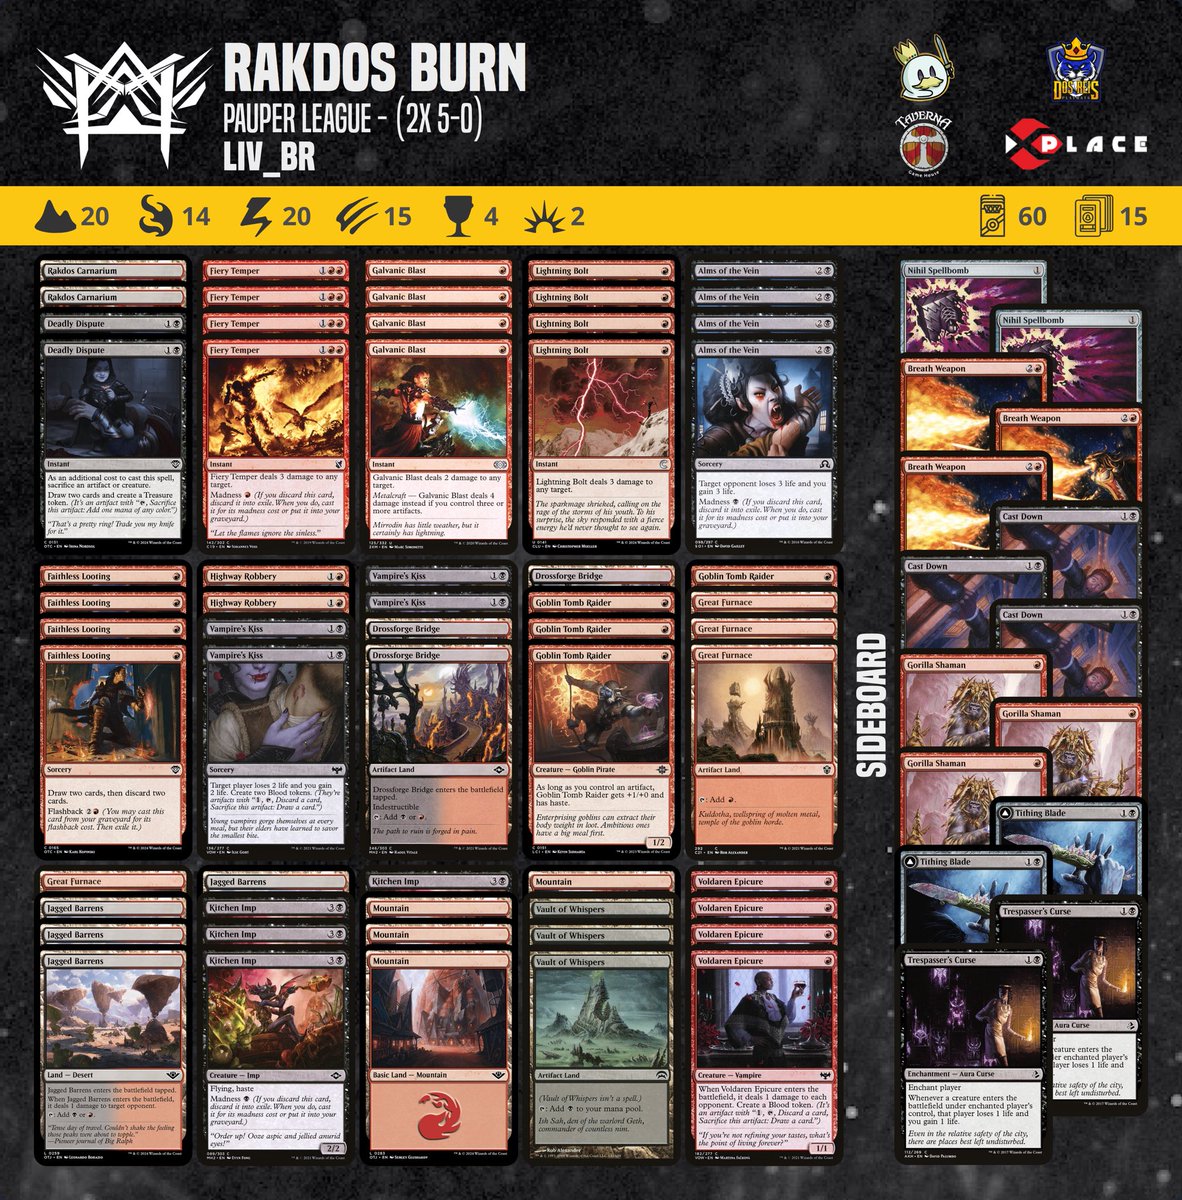 Our athlete Liv_BR achieved a 2x 5-0 in the Pauper League tournament with this Rakdos Burn decklist.

#pauper  #magic #mtgcommon #metagamepauper #mtgpauper #magicthegathering #wizardsofthecoast 

@PauperDecklists @fireshoes